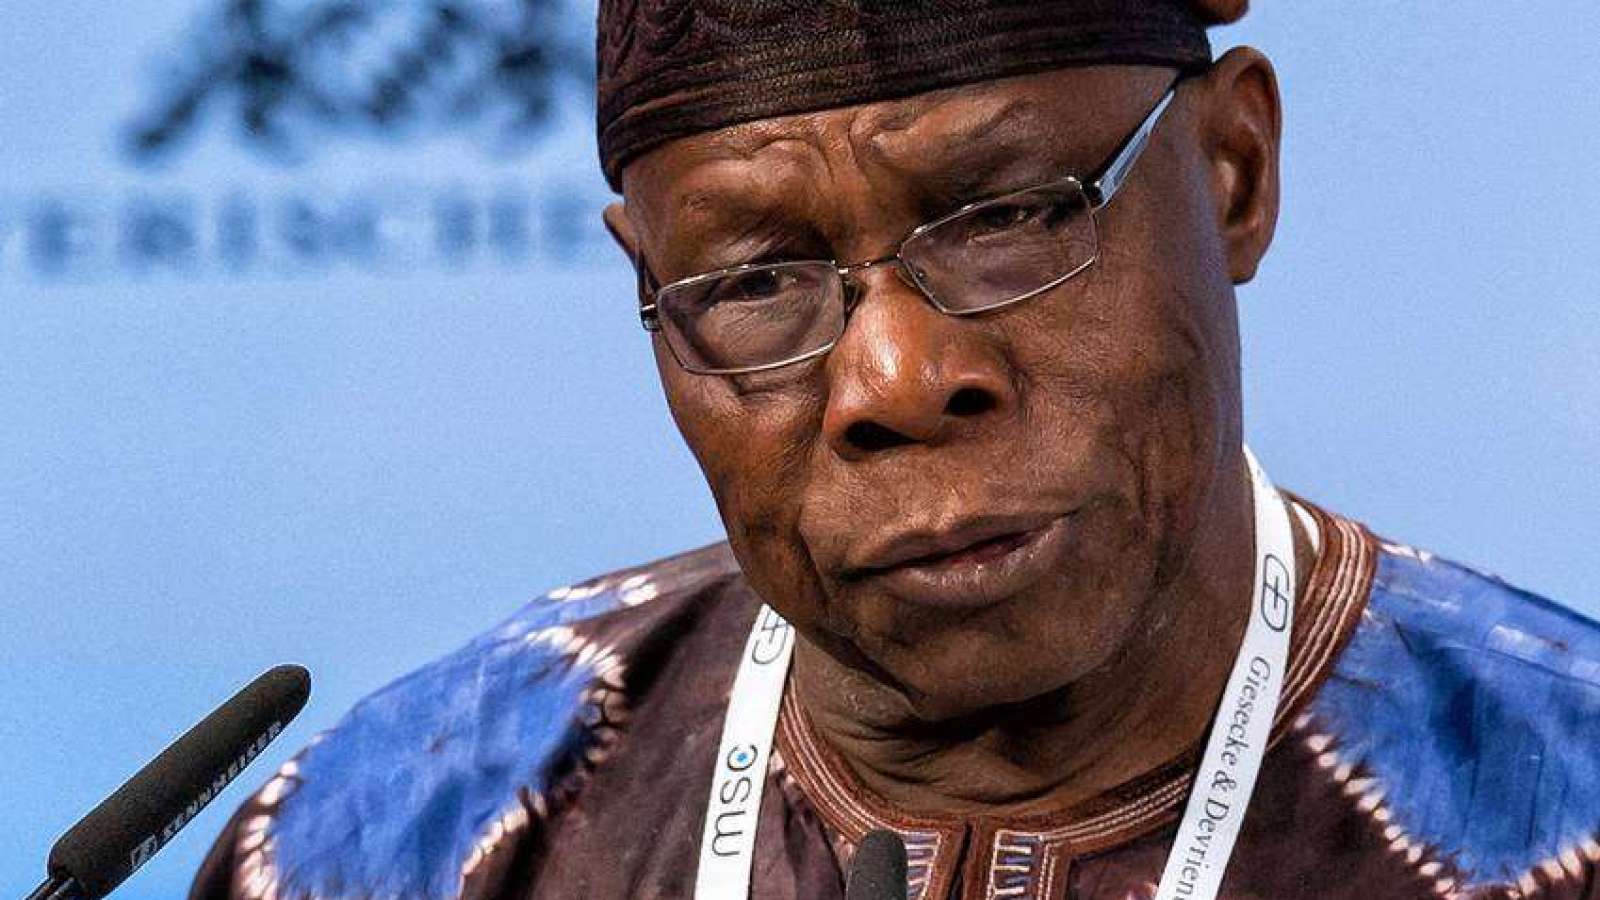 Jesus Christ, The Only Messiah Was Imperfect As Man, And So Is Atiku - Obasanjo 3